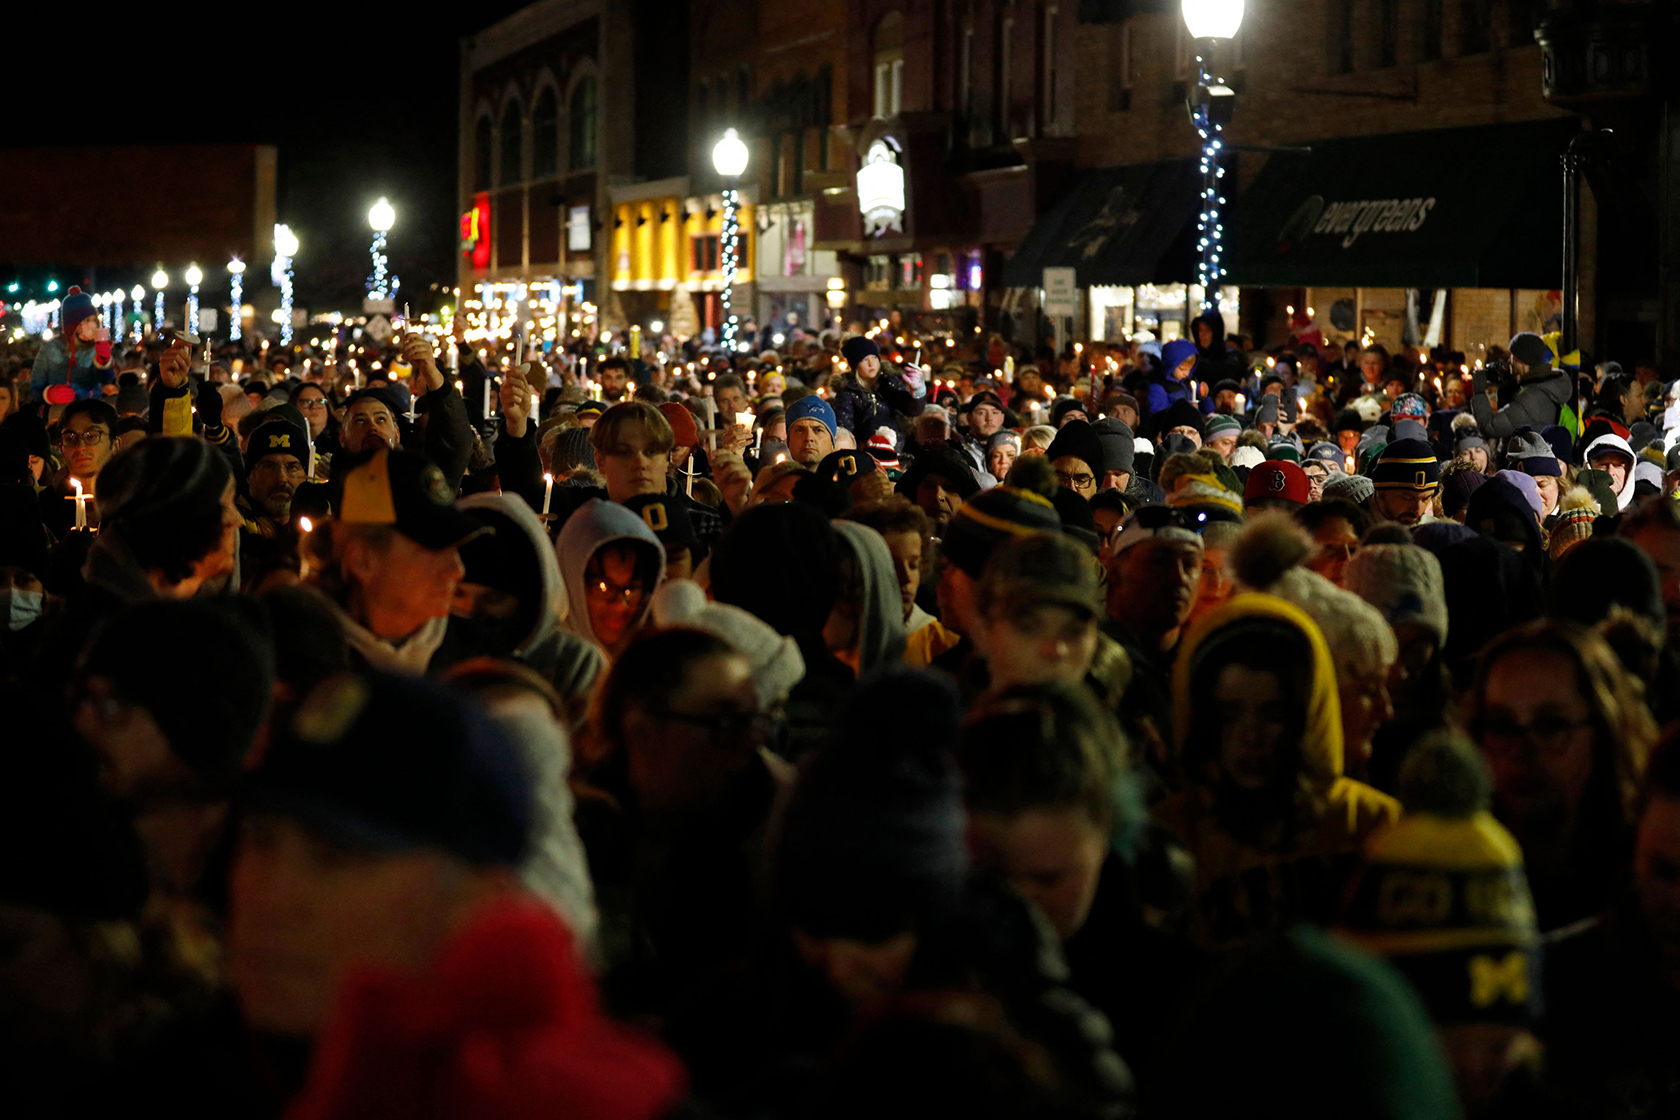 A crowd at a nighttime candlelight vigil